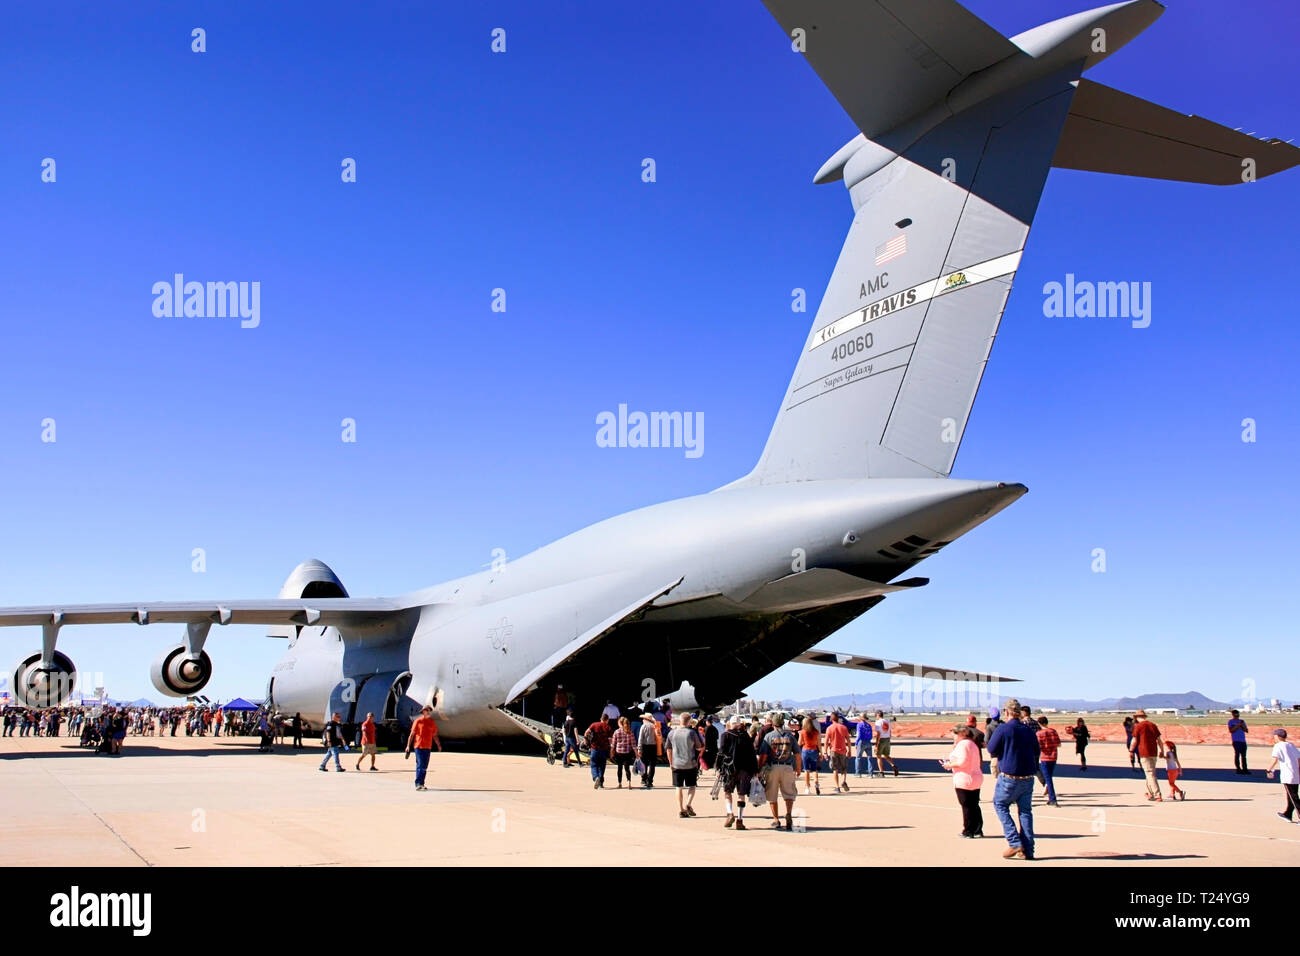 People enjoyng getting up close to a USAF Lockheed C-5 Galaxy heavy cargo plane on display at Davis-Monthan AFB airshow in Tucson AZ Stock Photo